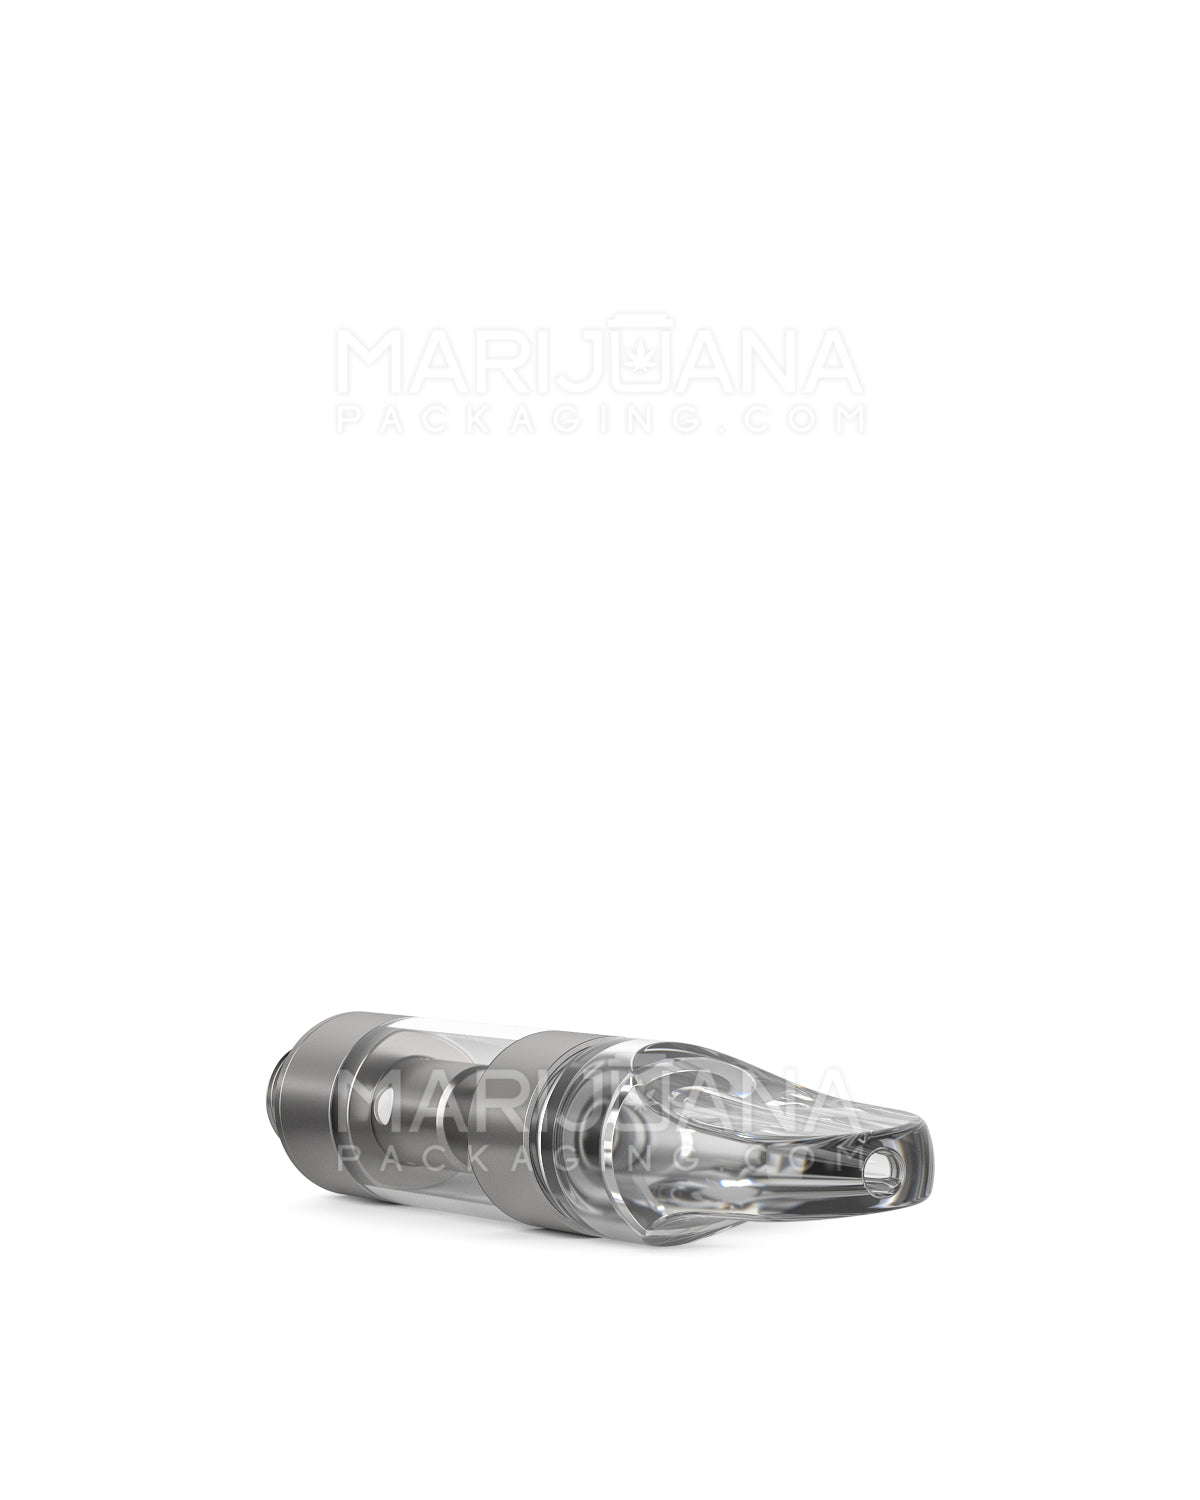 CCELL | Liquid6 Reactor Plastic Vape Cartridge with Clear Plastic Mouthpiece | 0.5mL - Press On - 100 Count - 6